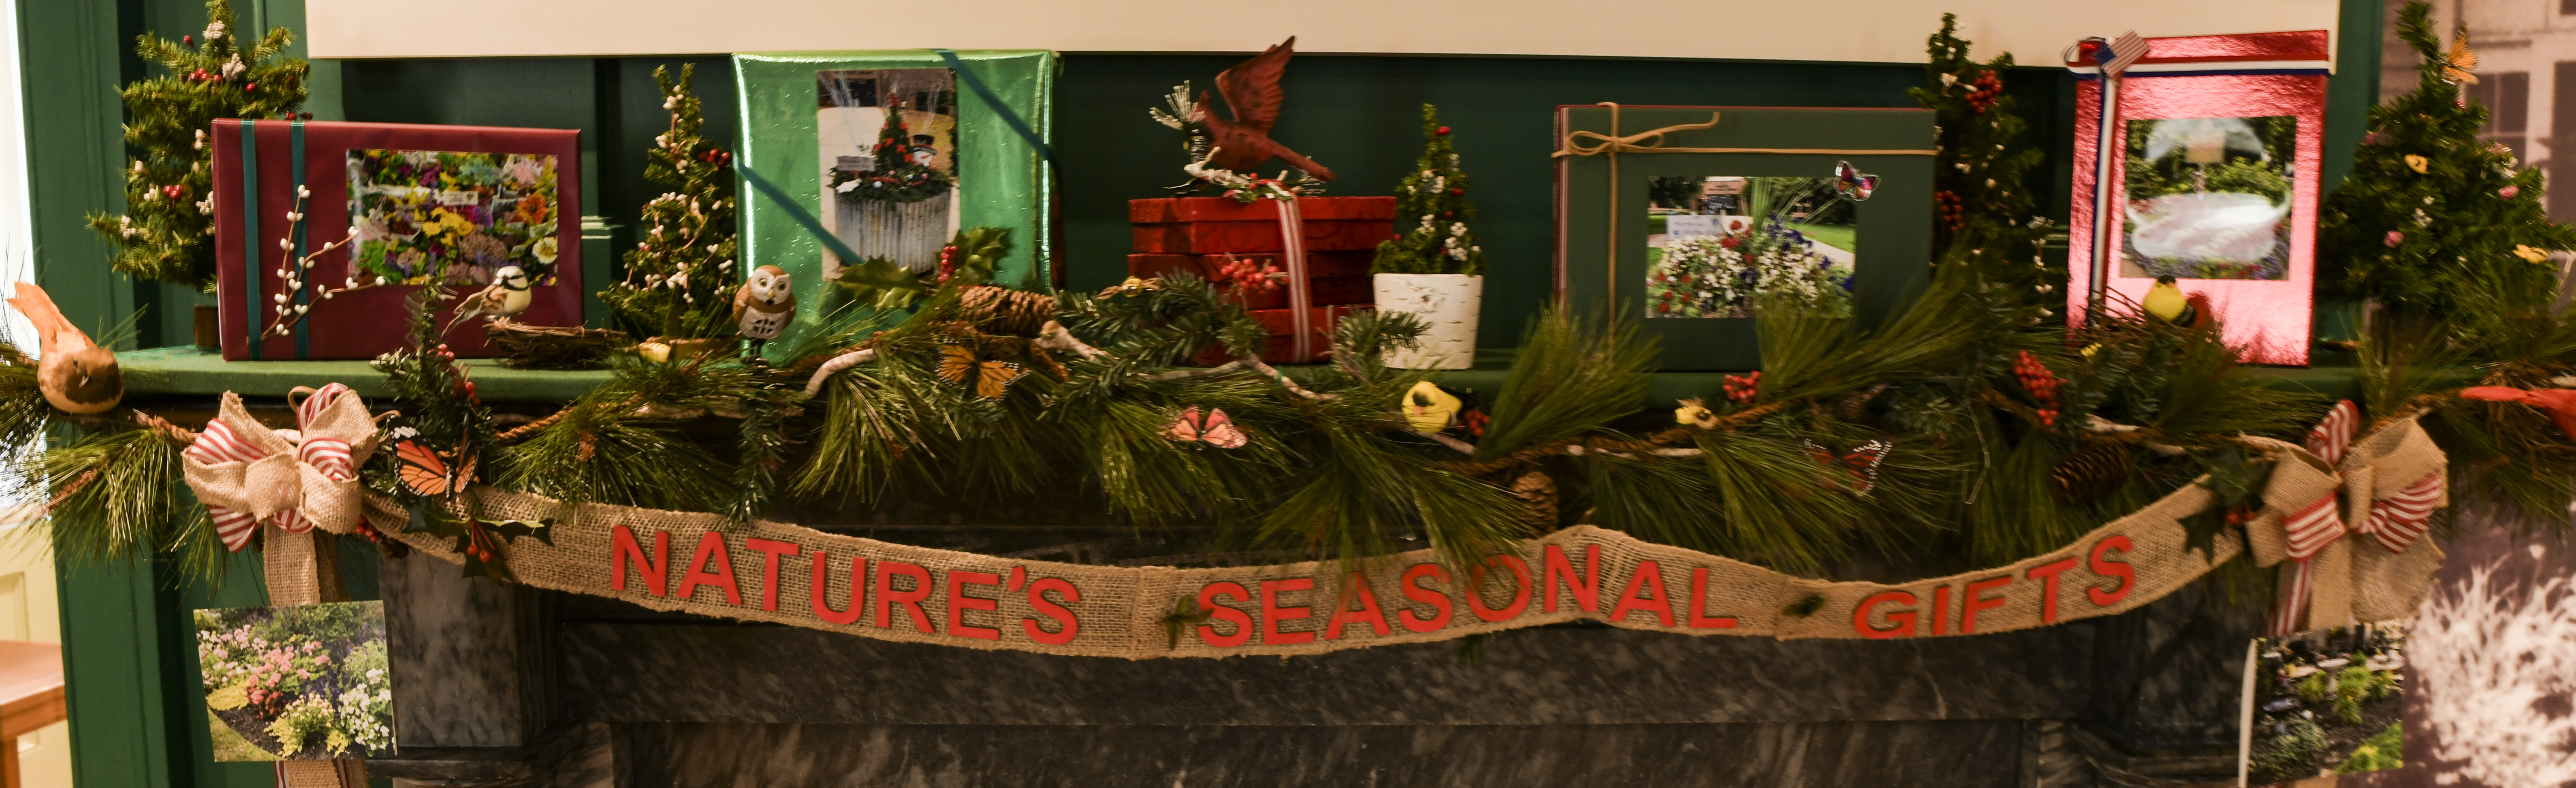 A close photo of a decorated mantelpiece entitled “Natures Seasonal Gifts” by Nottingham Garden Club of Hamilton Township. Realistic bird figures and brightly colored packages with evergreens and berries are creatively displayed.